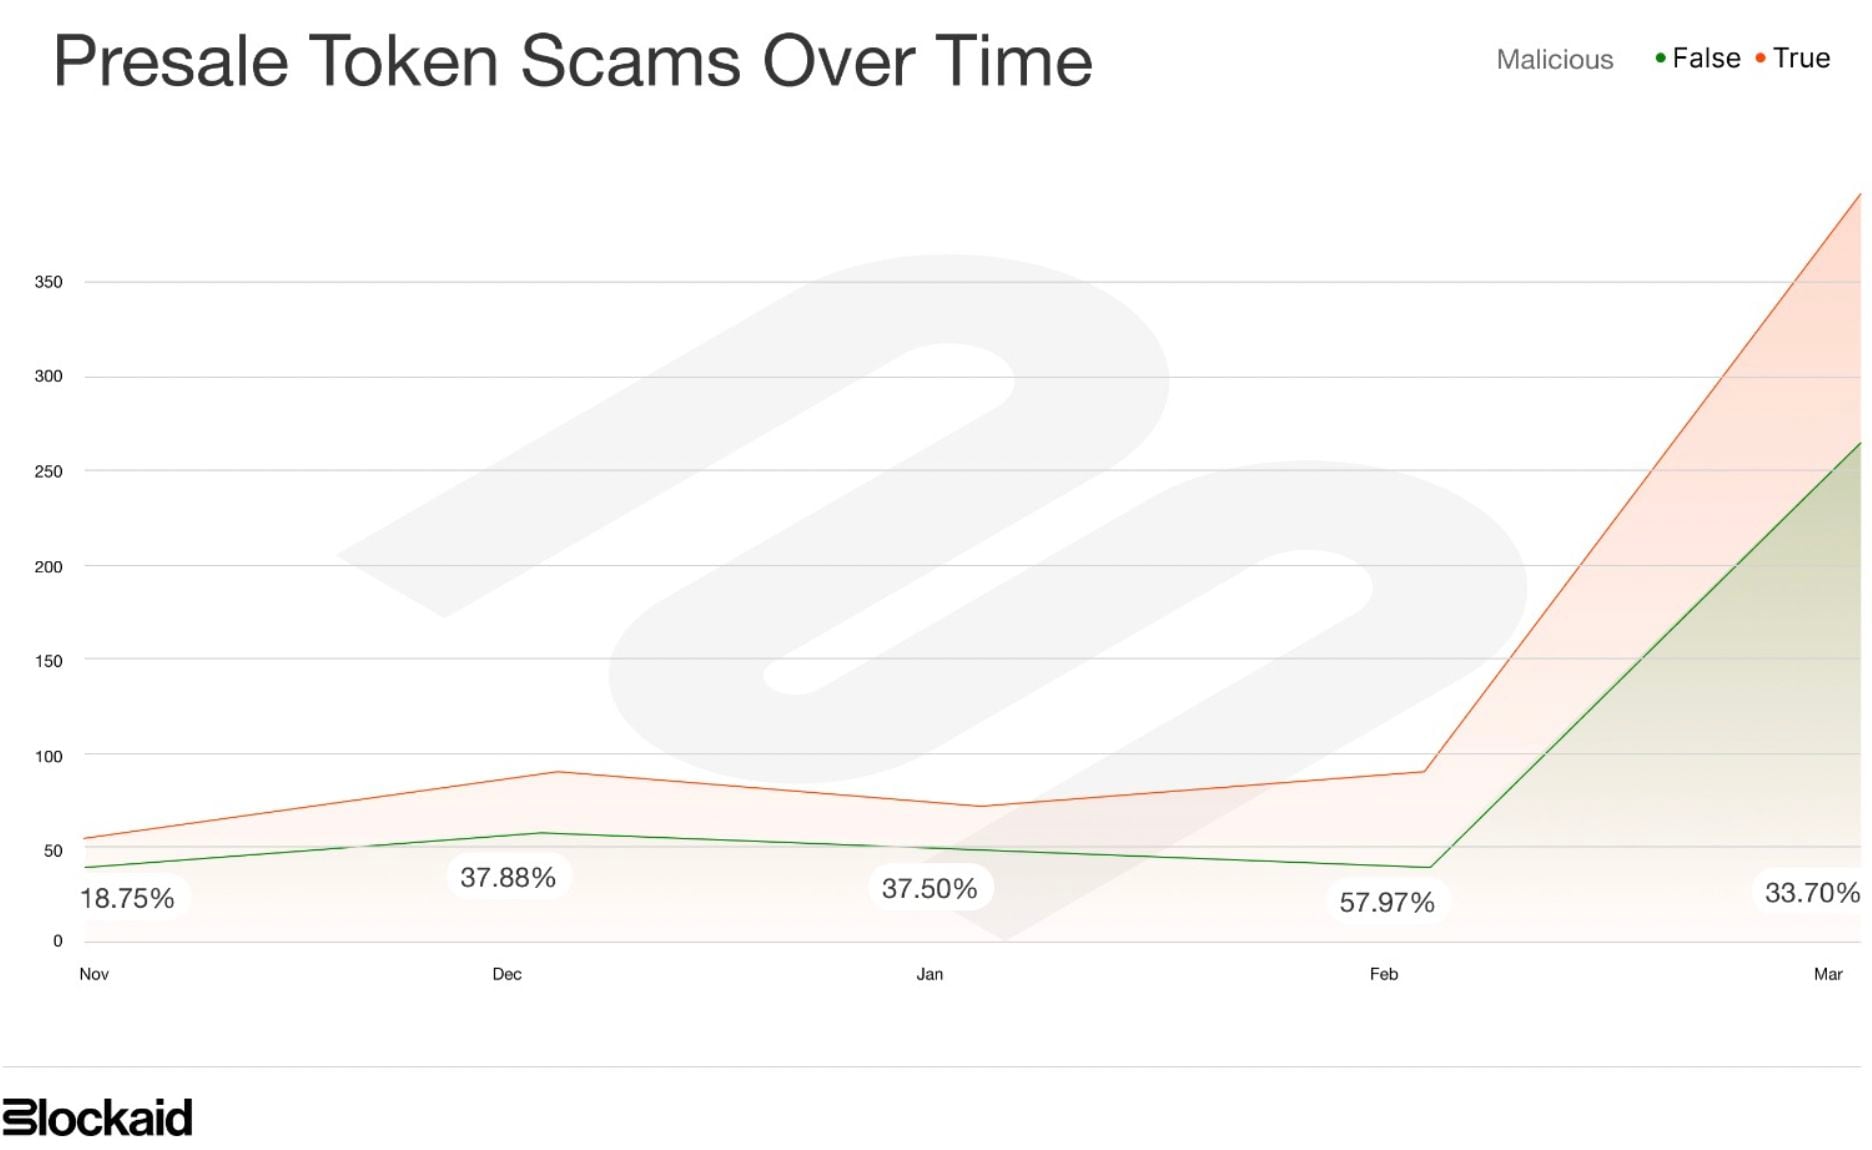 Pre-sale token scams on the rise (Blockaid)